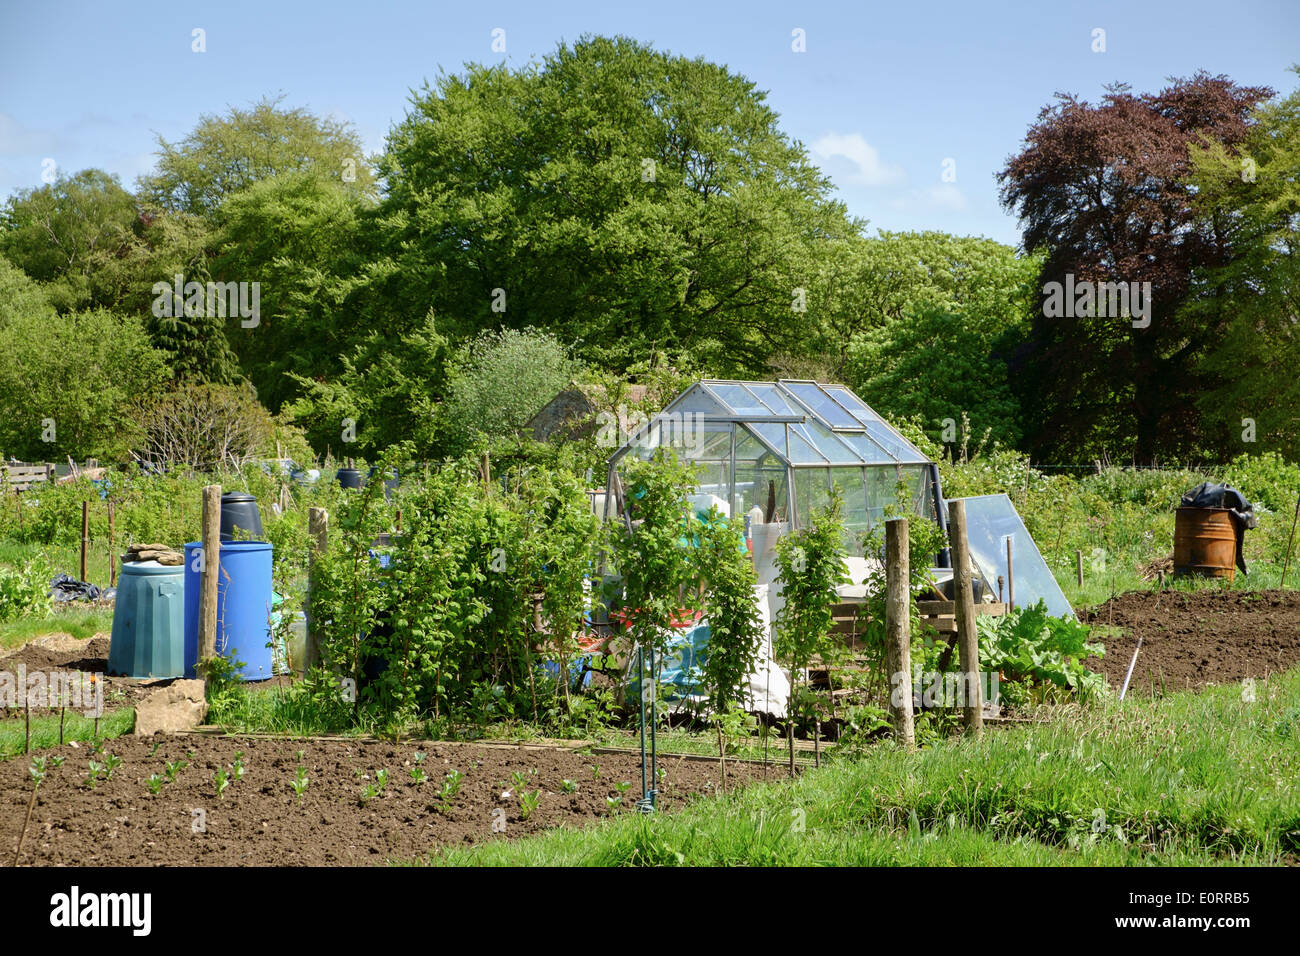 Allotments in England, UK with greenhouse, allotment and gardening plots for growing vegetables Stock Photo